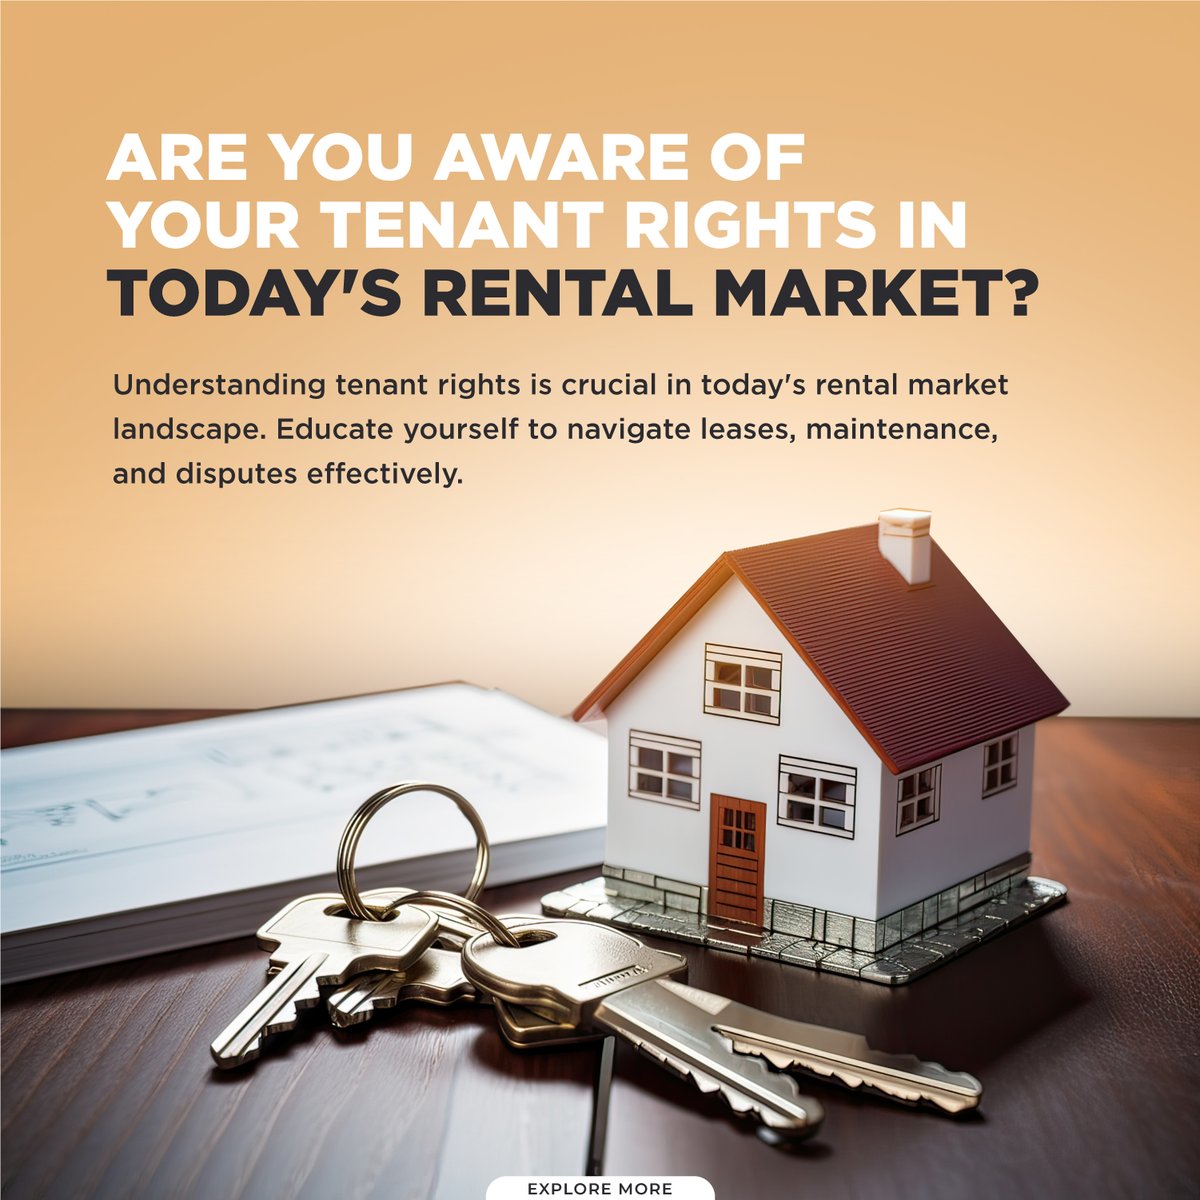 In today's rental market, understanding tenant rights is paramount. Educate yourself on lease agreements, maintenance standards, and dispute resolution to navigate effectively. 

🔗 estateagentsbeckton.co.uk/property-manag…

#EstateAgentsBeckton #propertymanagement #estateagentsuk